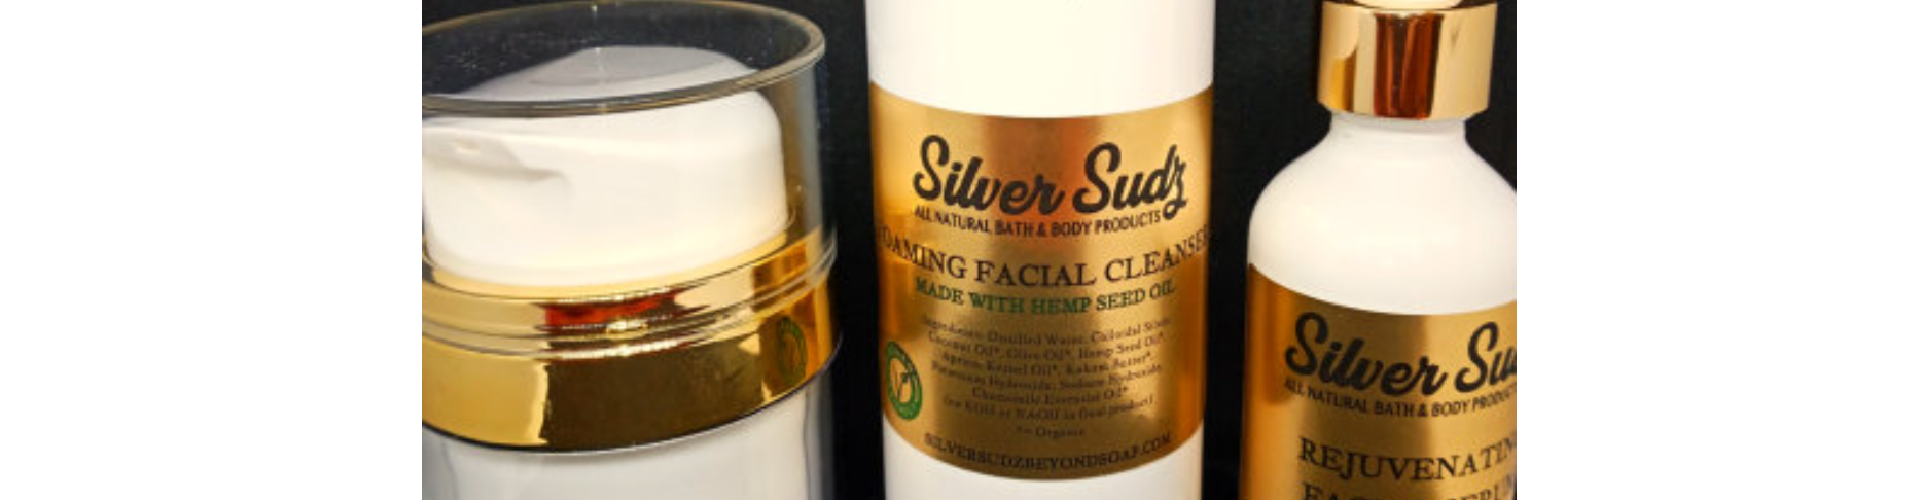 silver sudz cleanser products